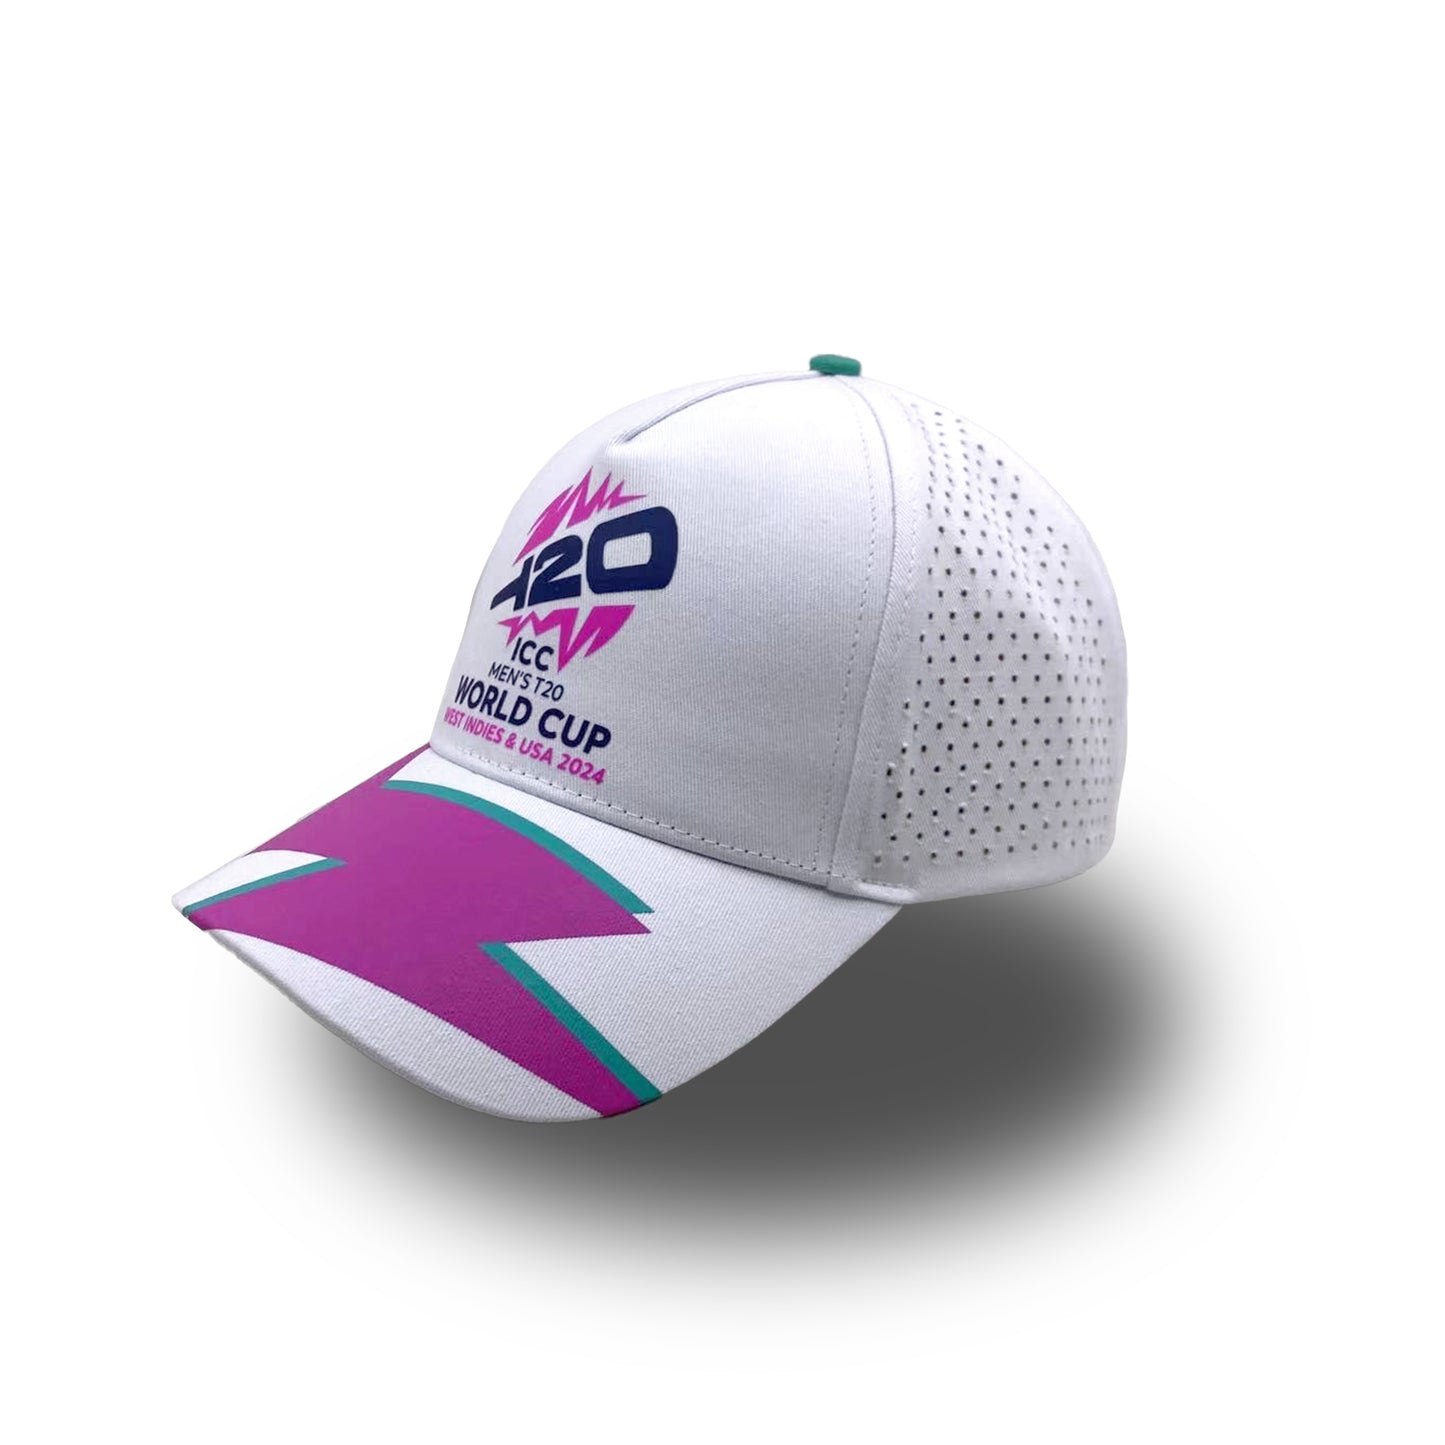 ICC T20 World Cup White Bolt Cap - West Indies & USA 2024 Edition